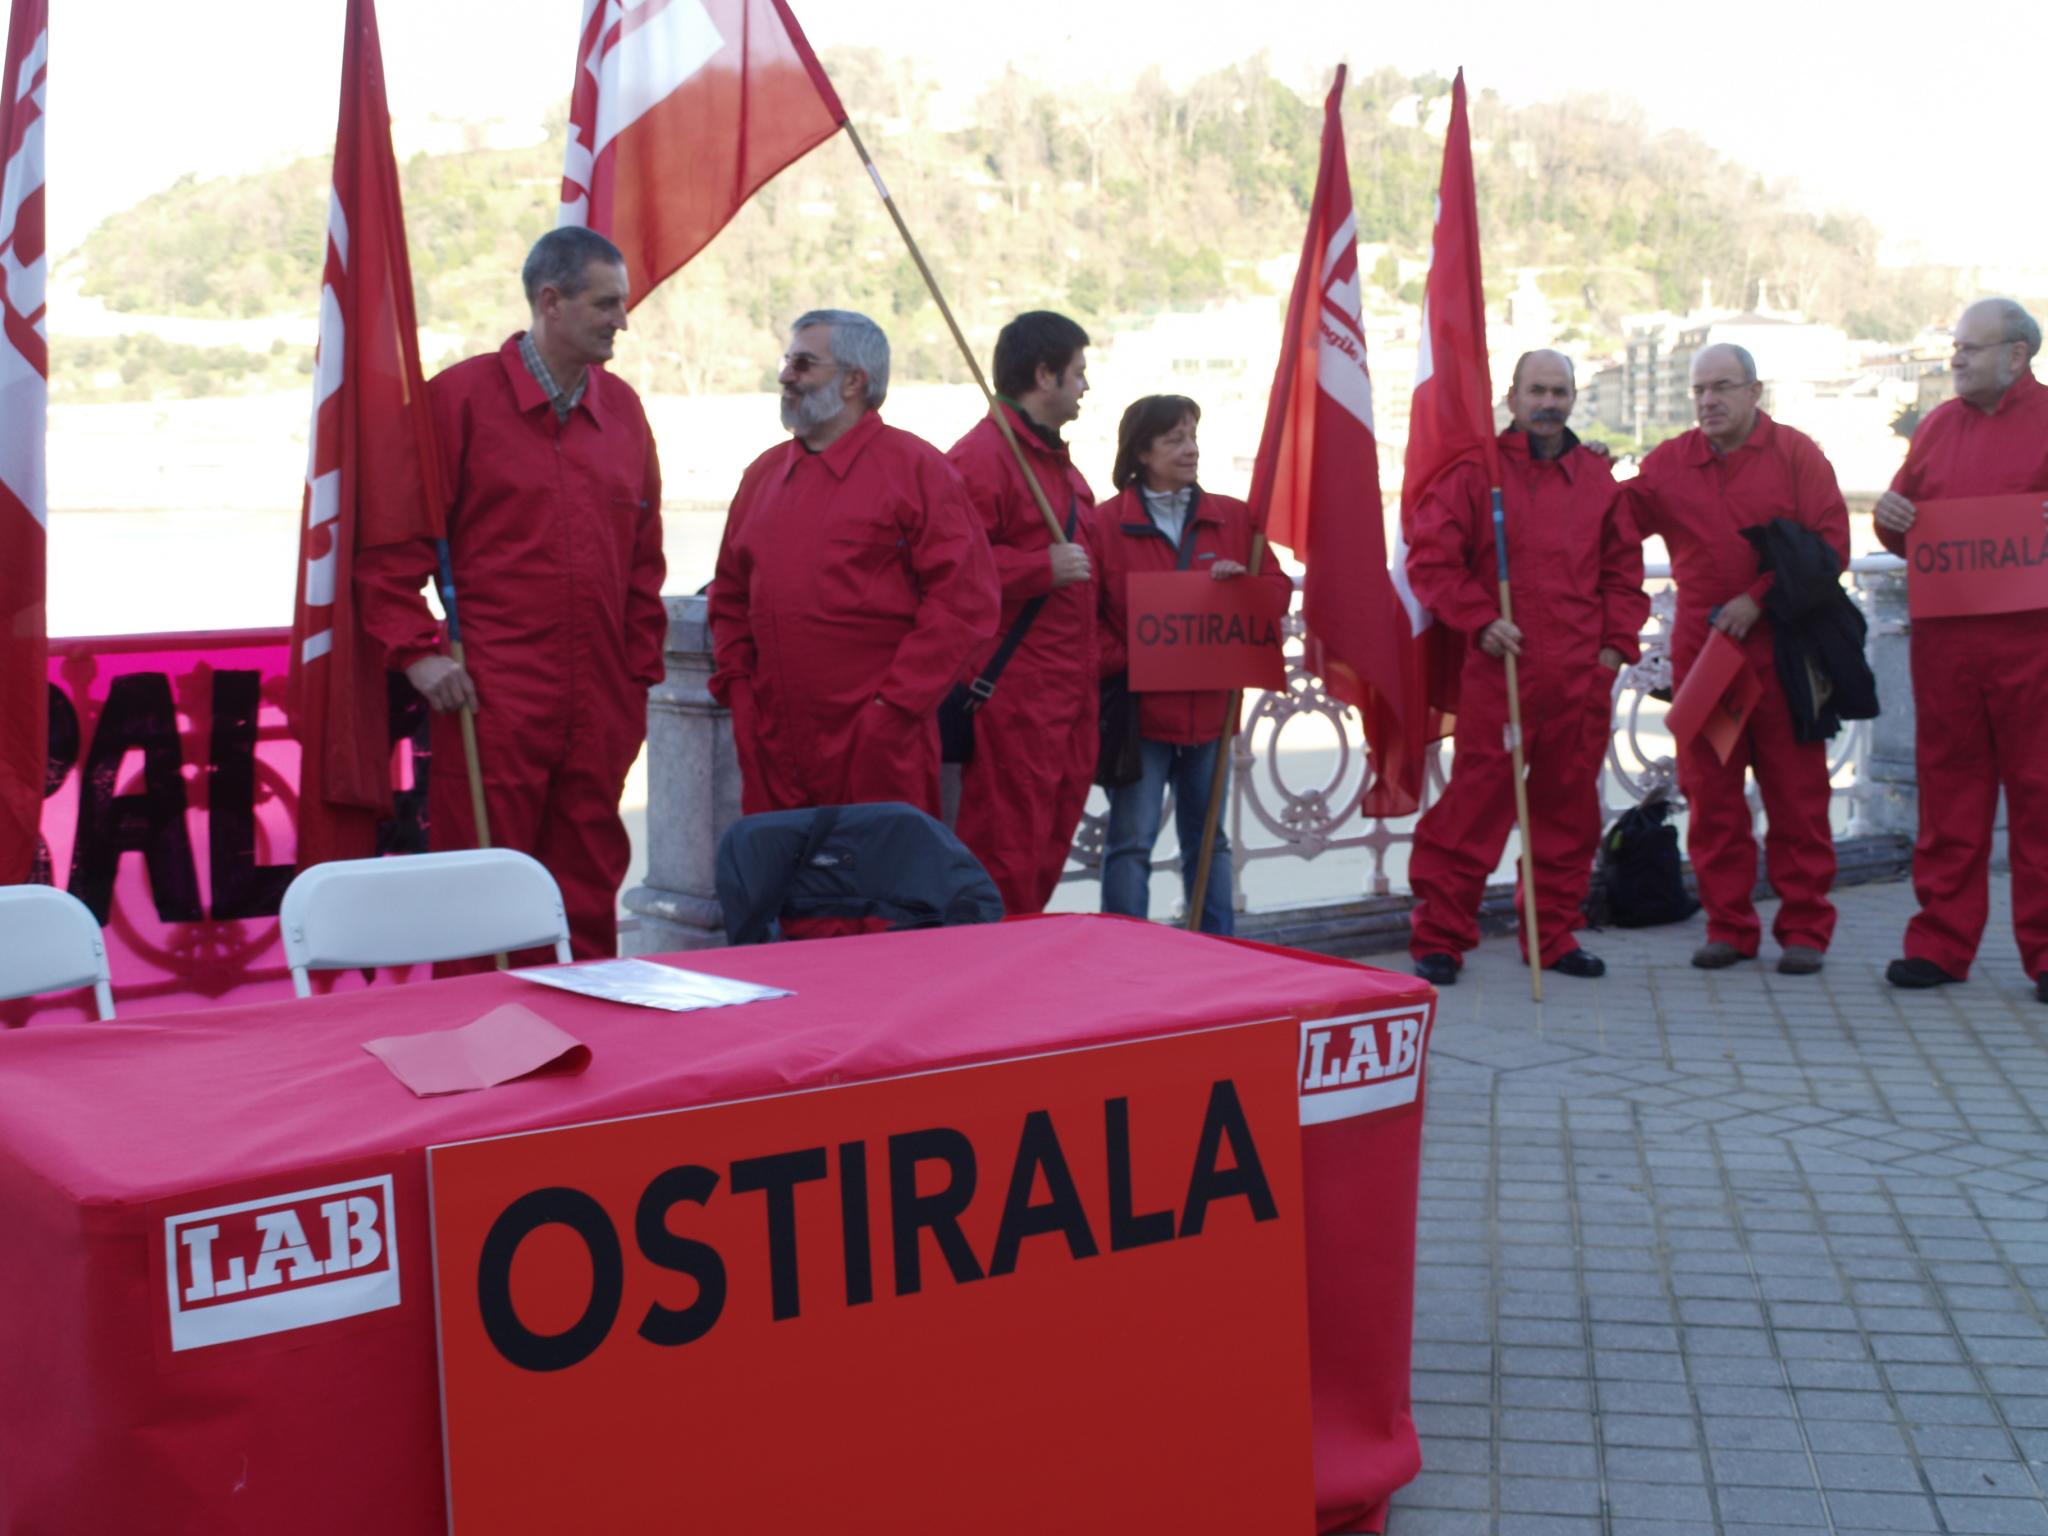 the men wearing red suits hold flags and signs